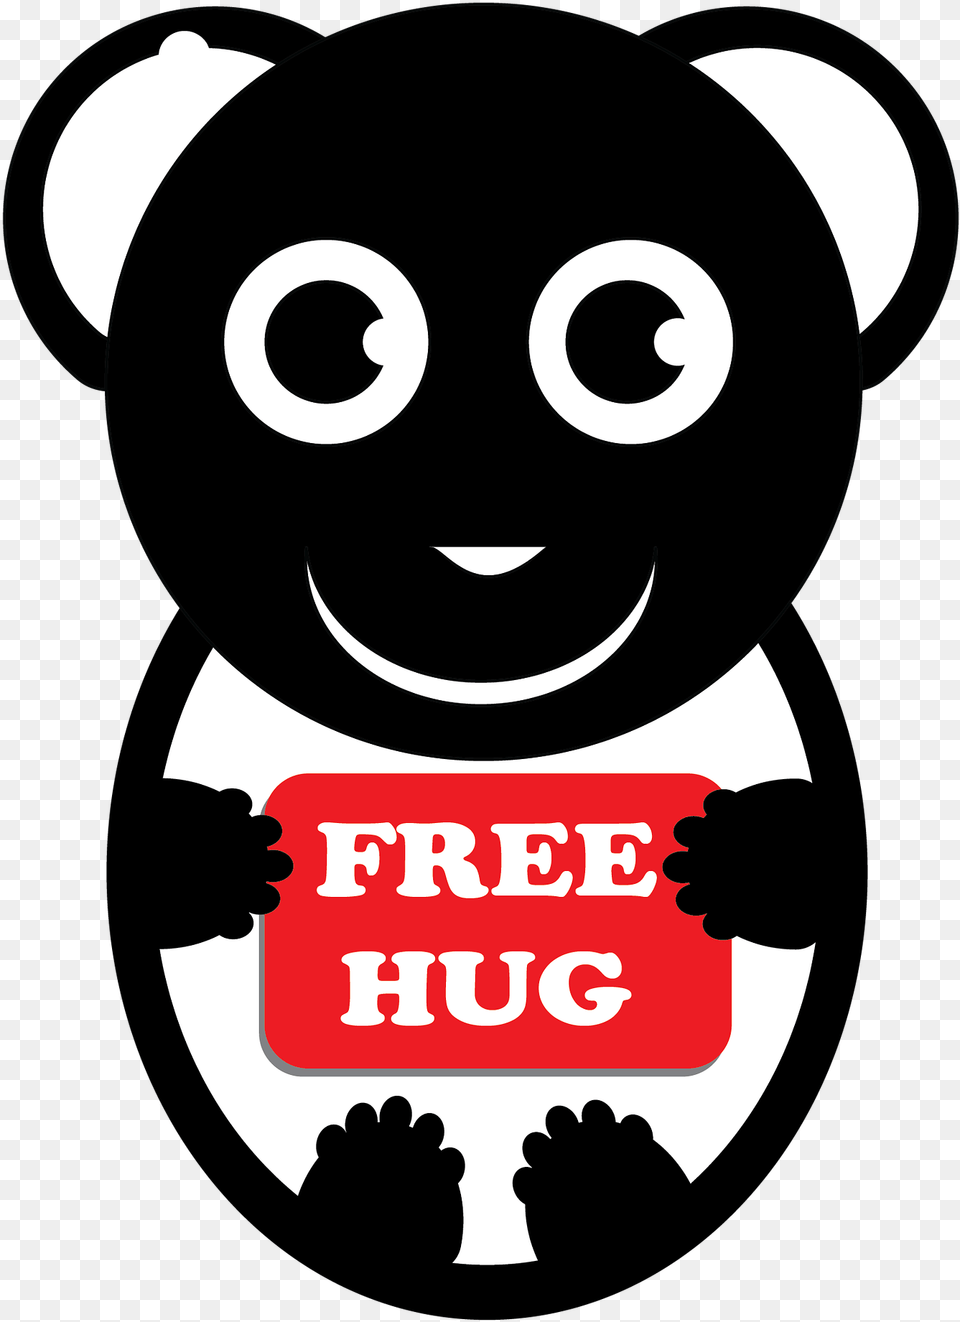 Digital Hugs From Pari Smart Animal Toys Infinityleap Dot, Sticker, Baby, Person Png